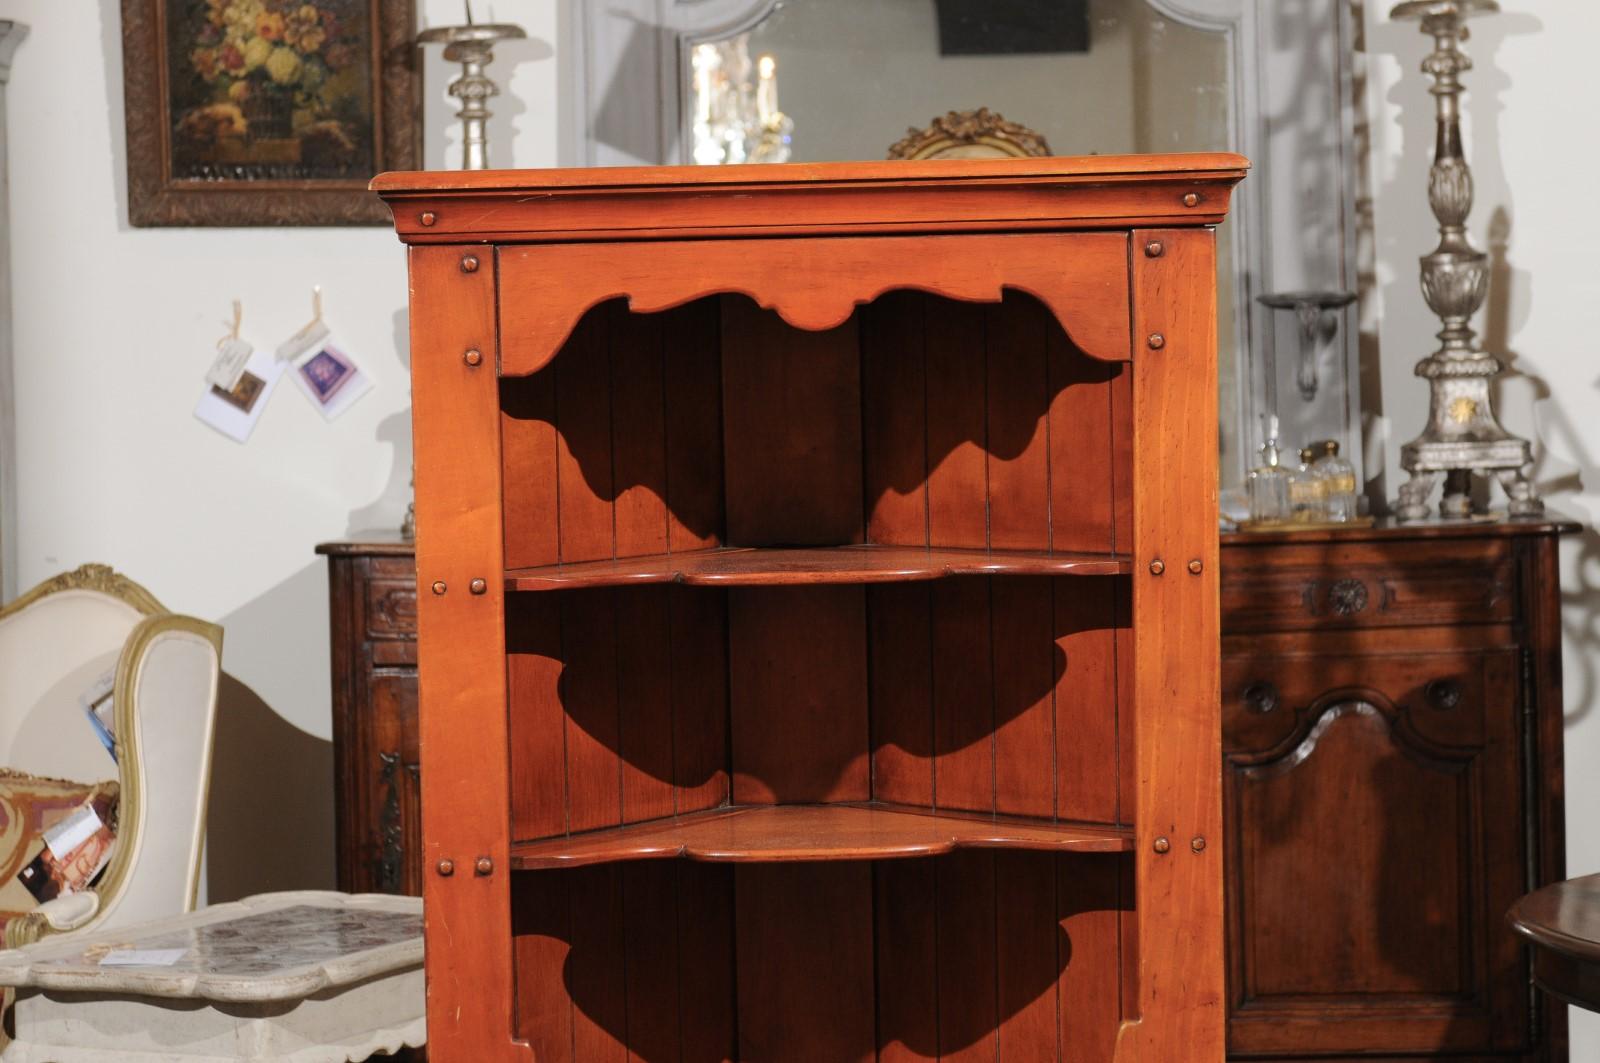 Early 20th Century American Cherry Corner Cabinet with Shelves and Single Door 1